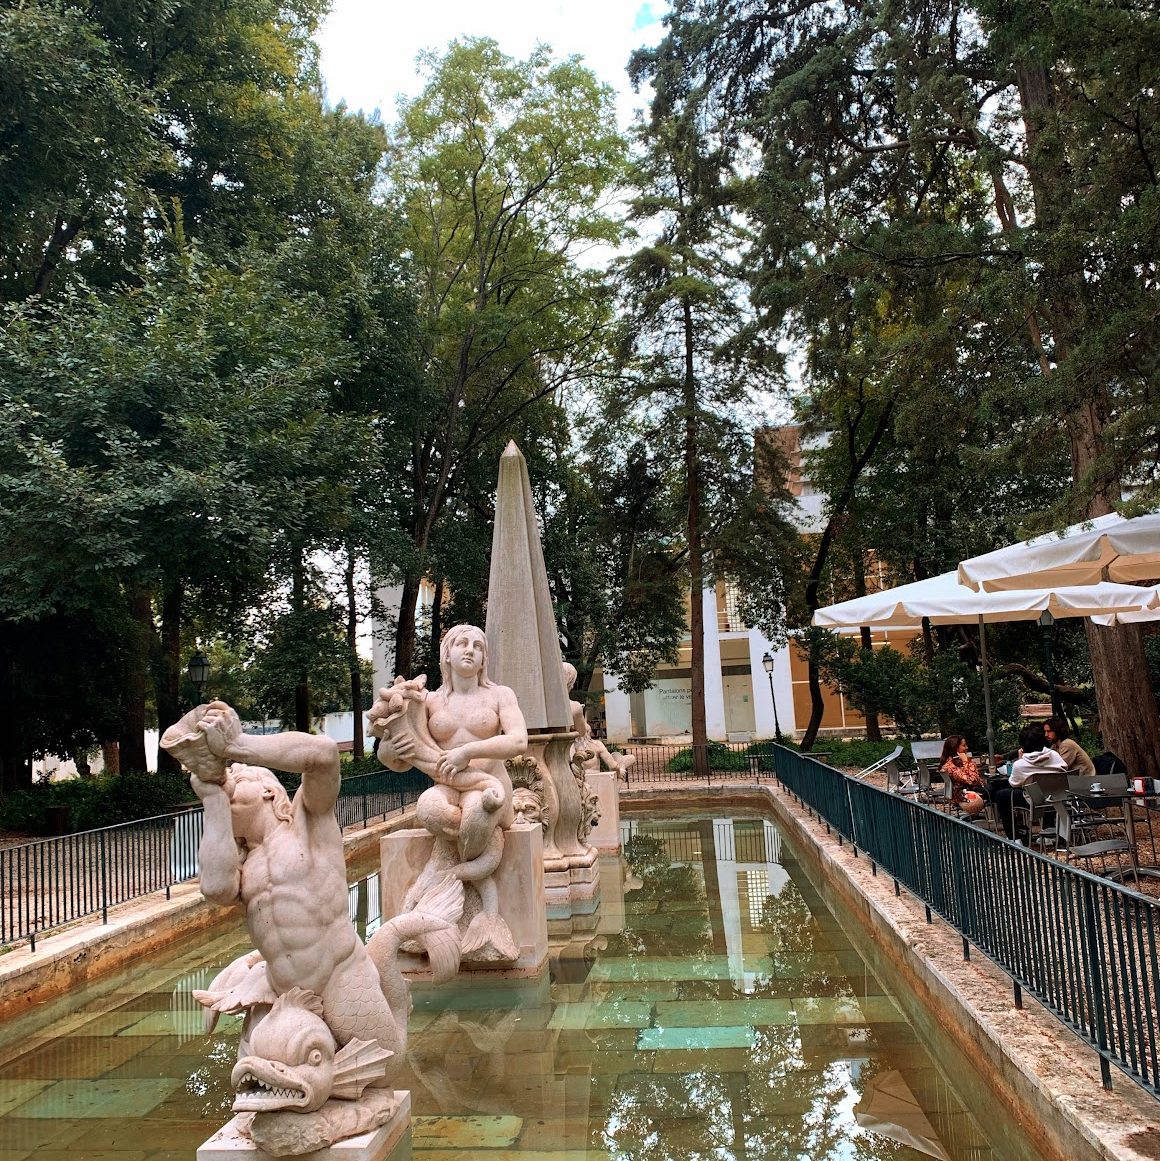 Statues in a large fountain next to a cafe